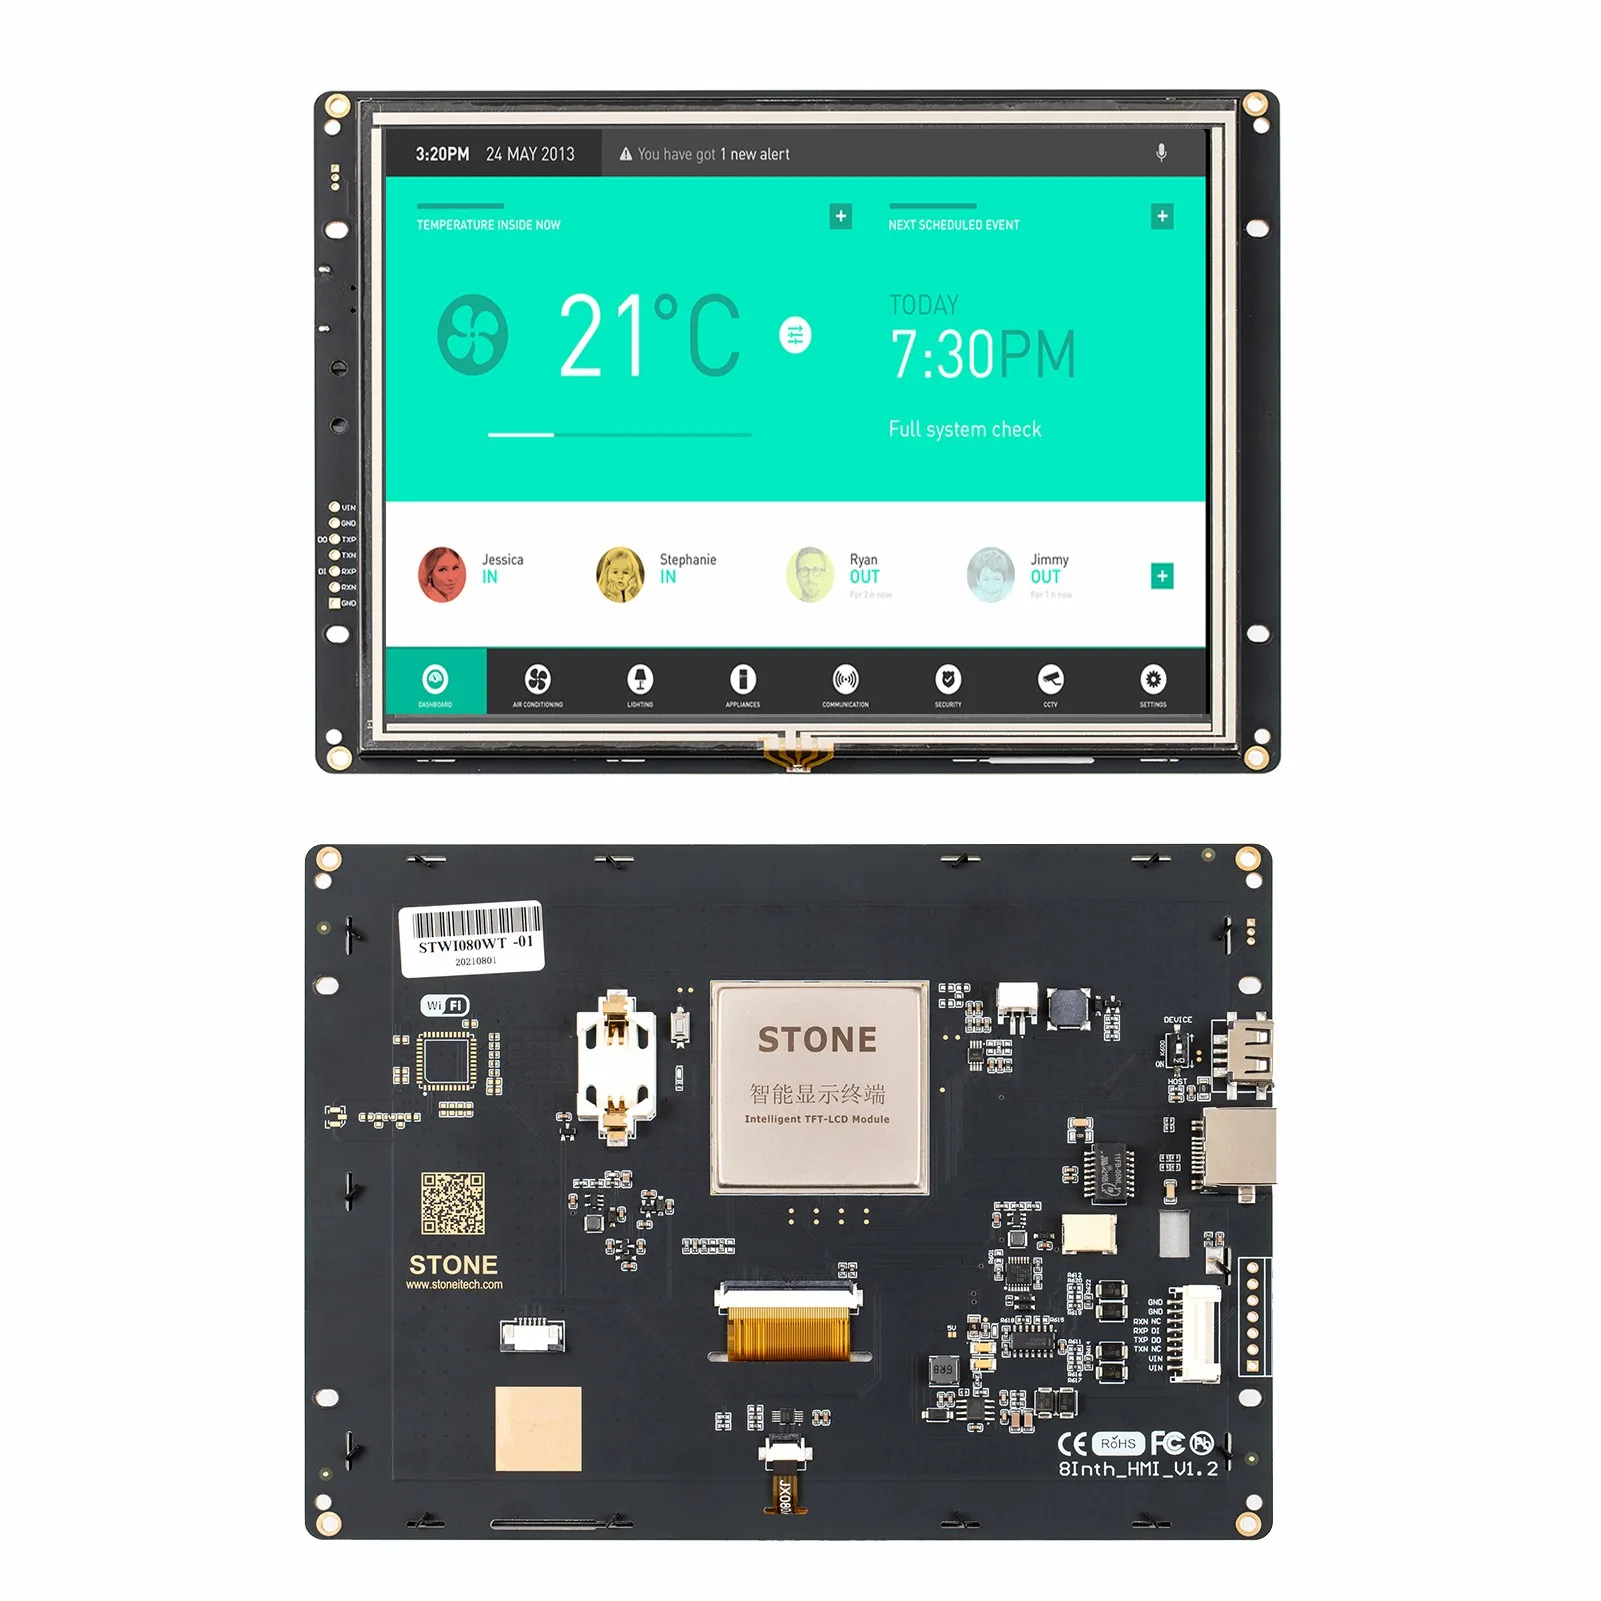 SCBRHMI 8.0 Inch LCD-TFT HMI Display Module Intelligent Series RGB 65K Color Resistive Touch Panel without Enclosure